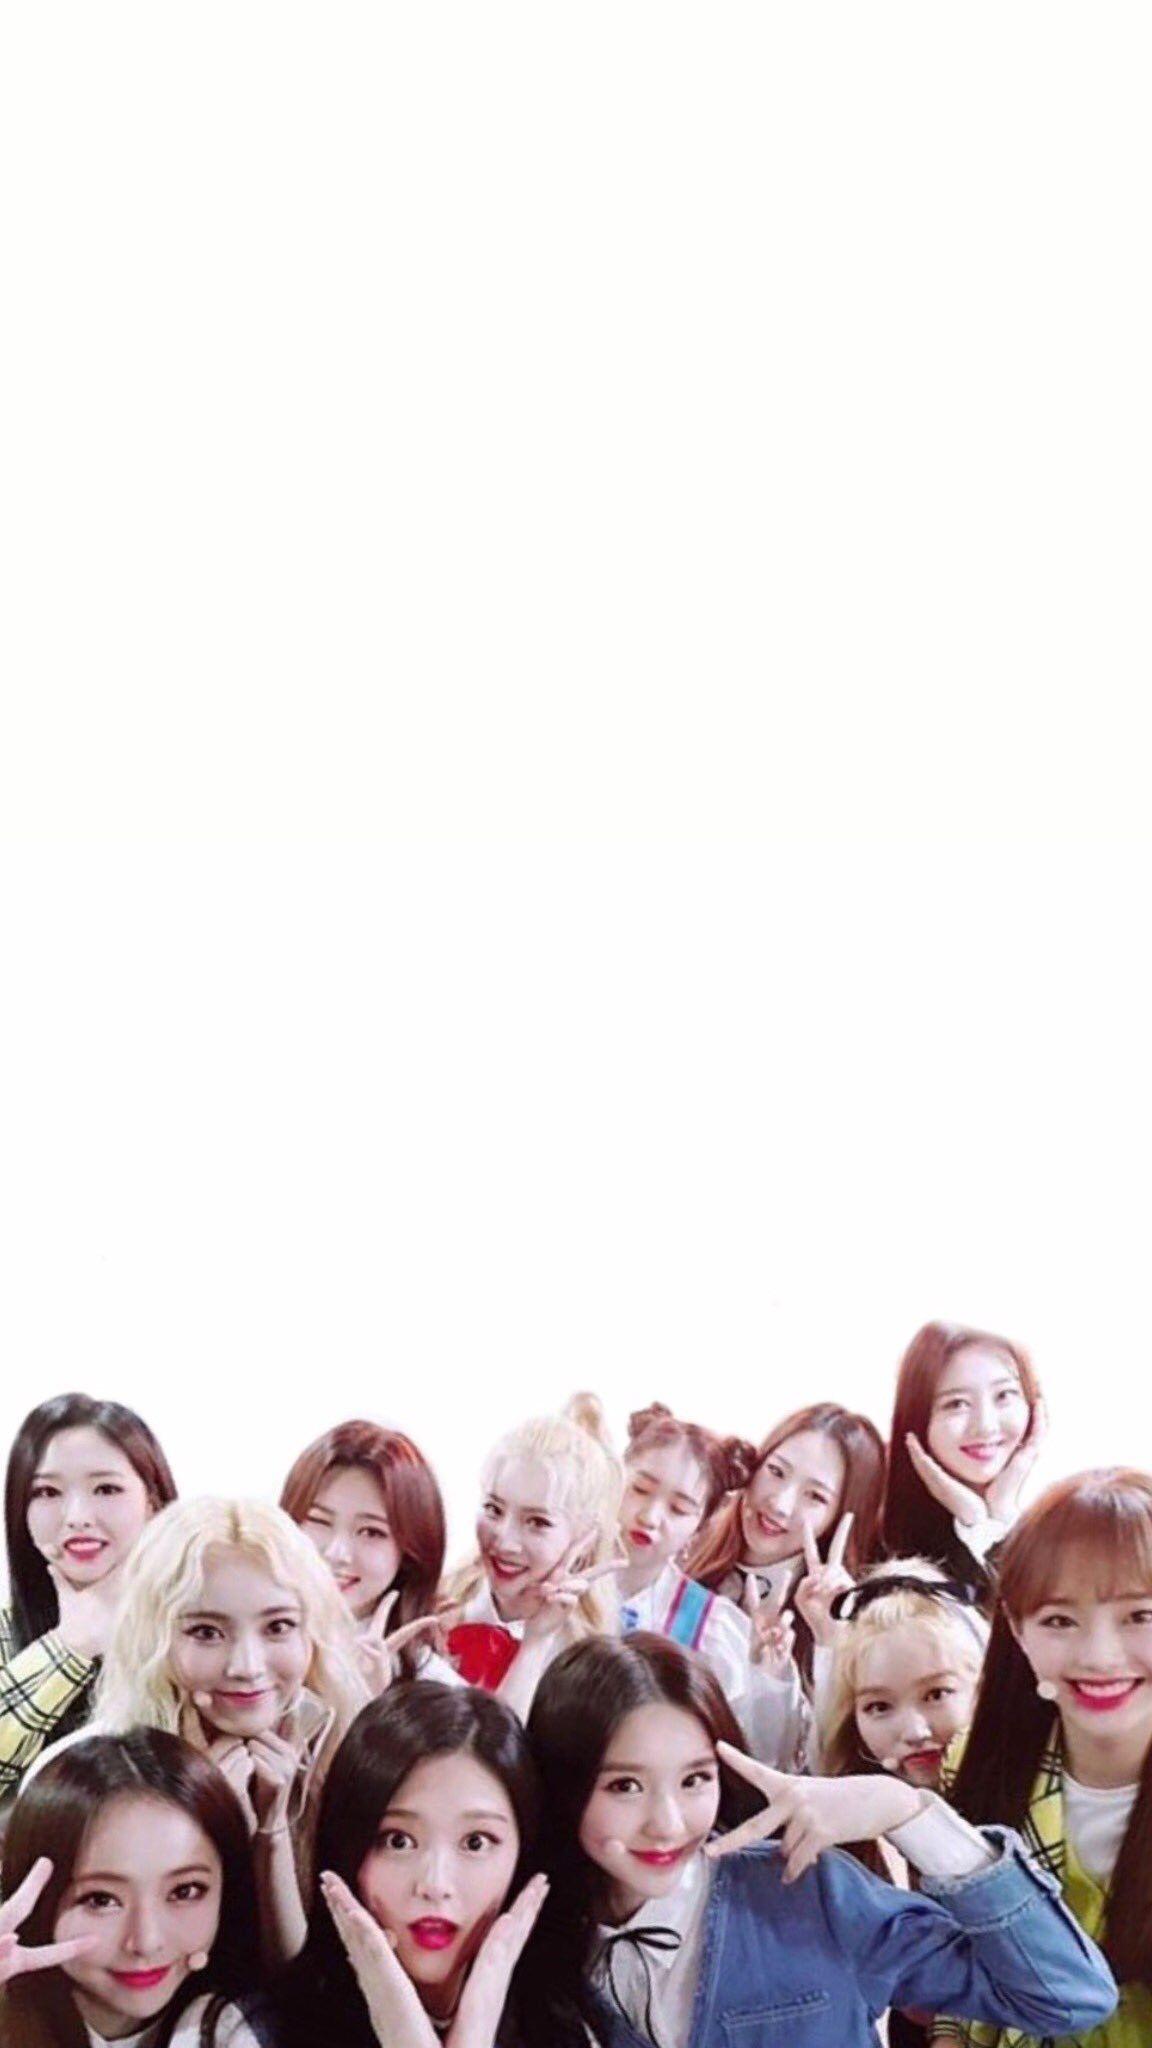 Loona photo for phone background. LOONA. Phone background